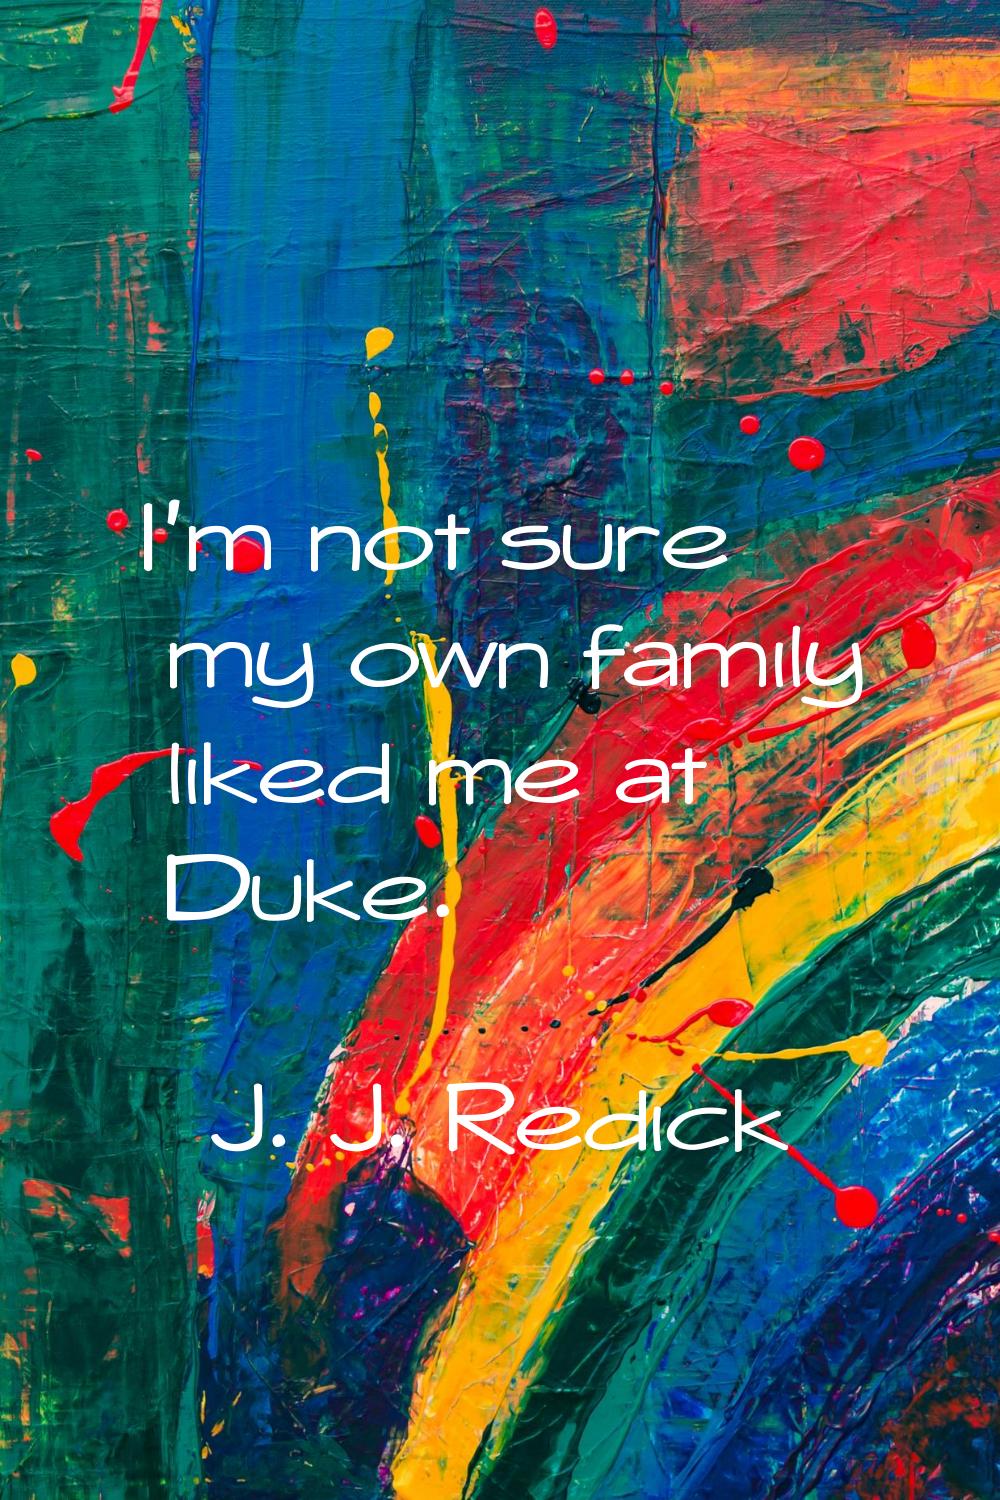 I'm not sure my own family liked me at Duke.